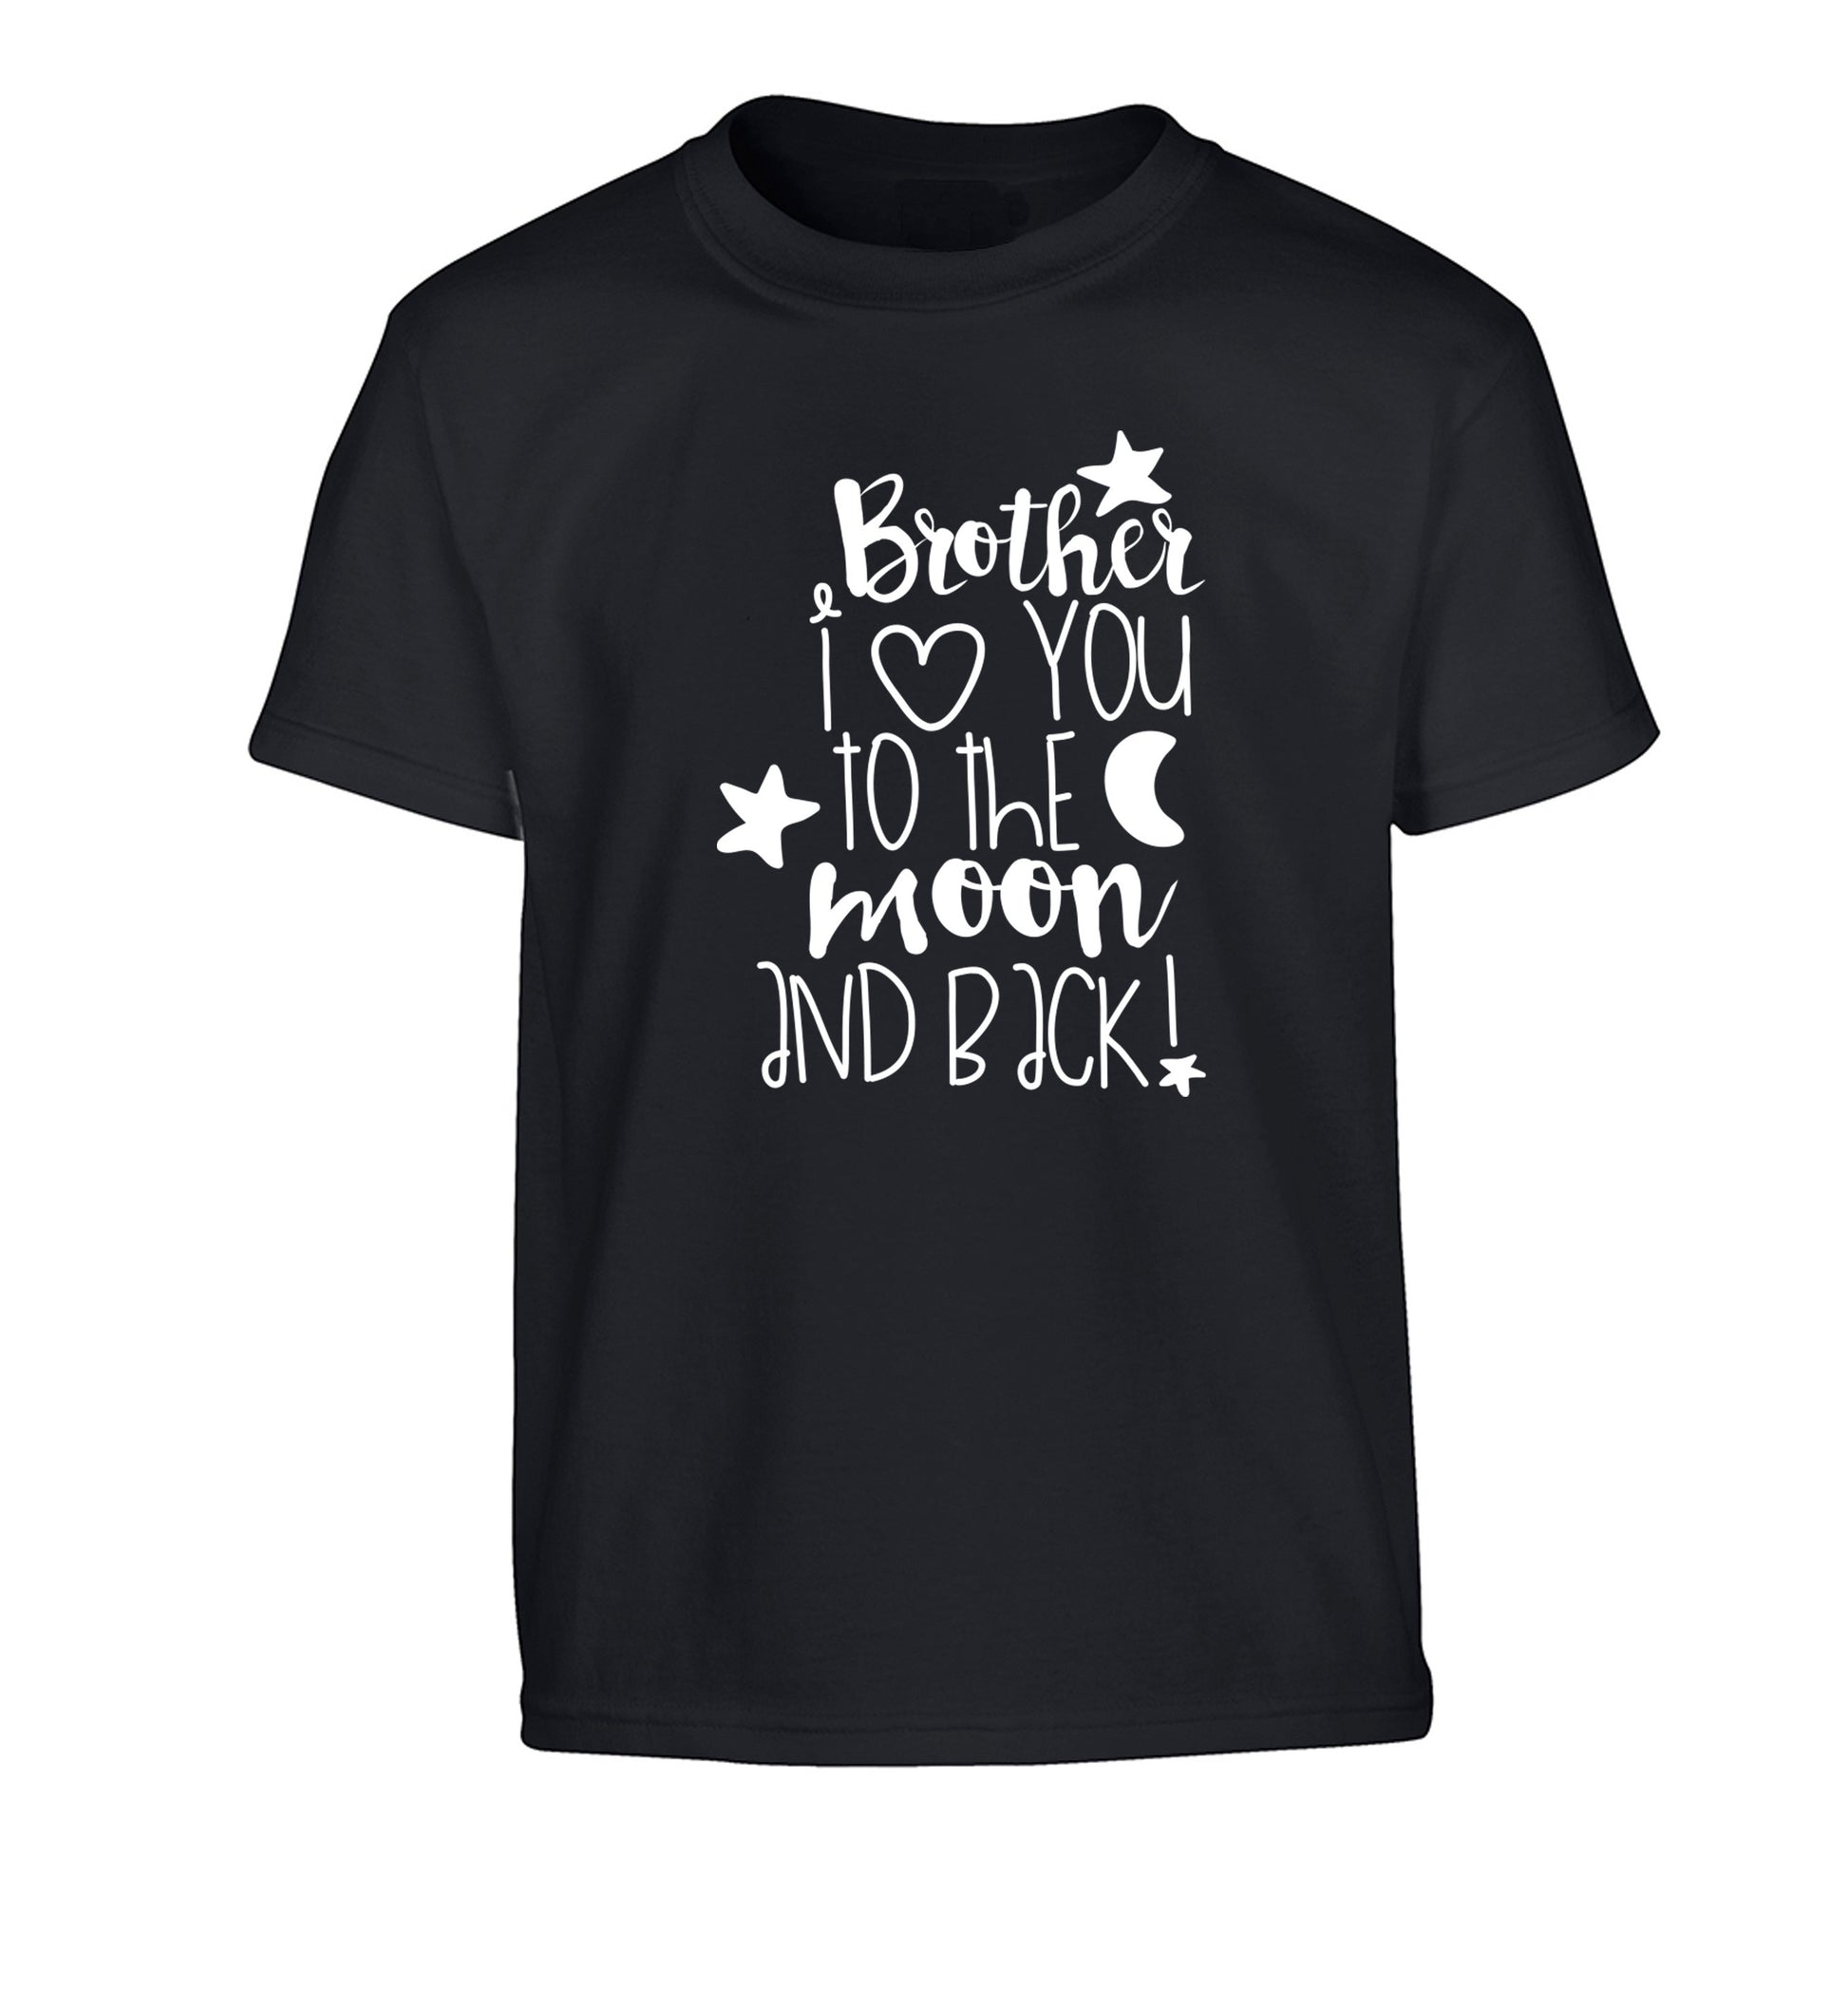 Brother I love you to the moon and back Children's black Tshirt 12-14 Years